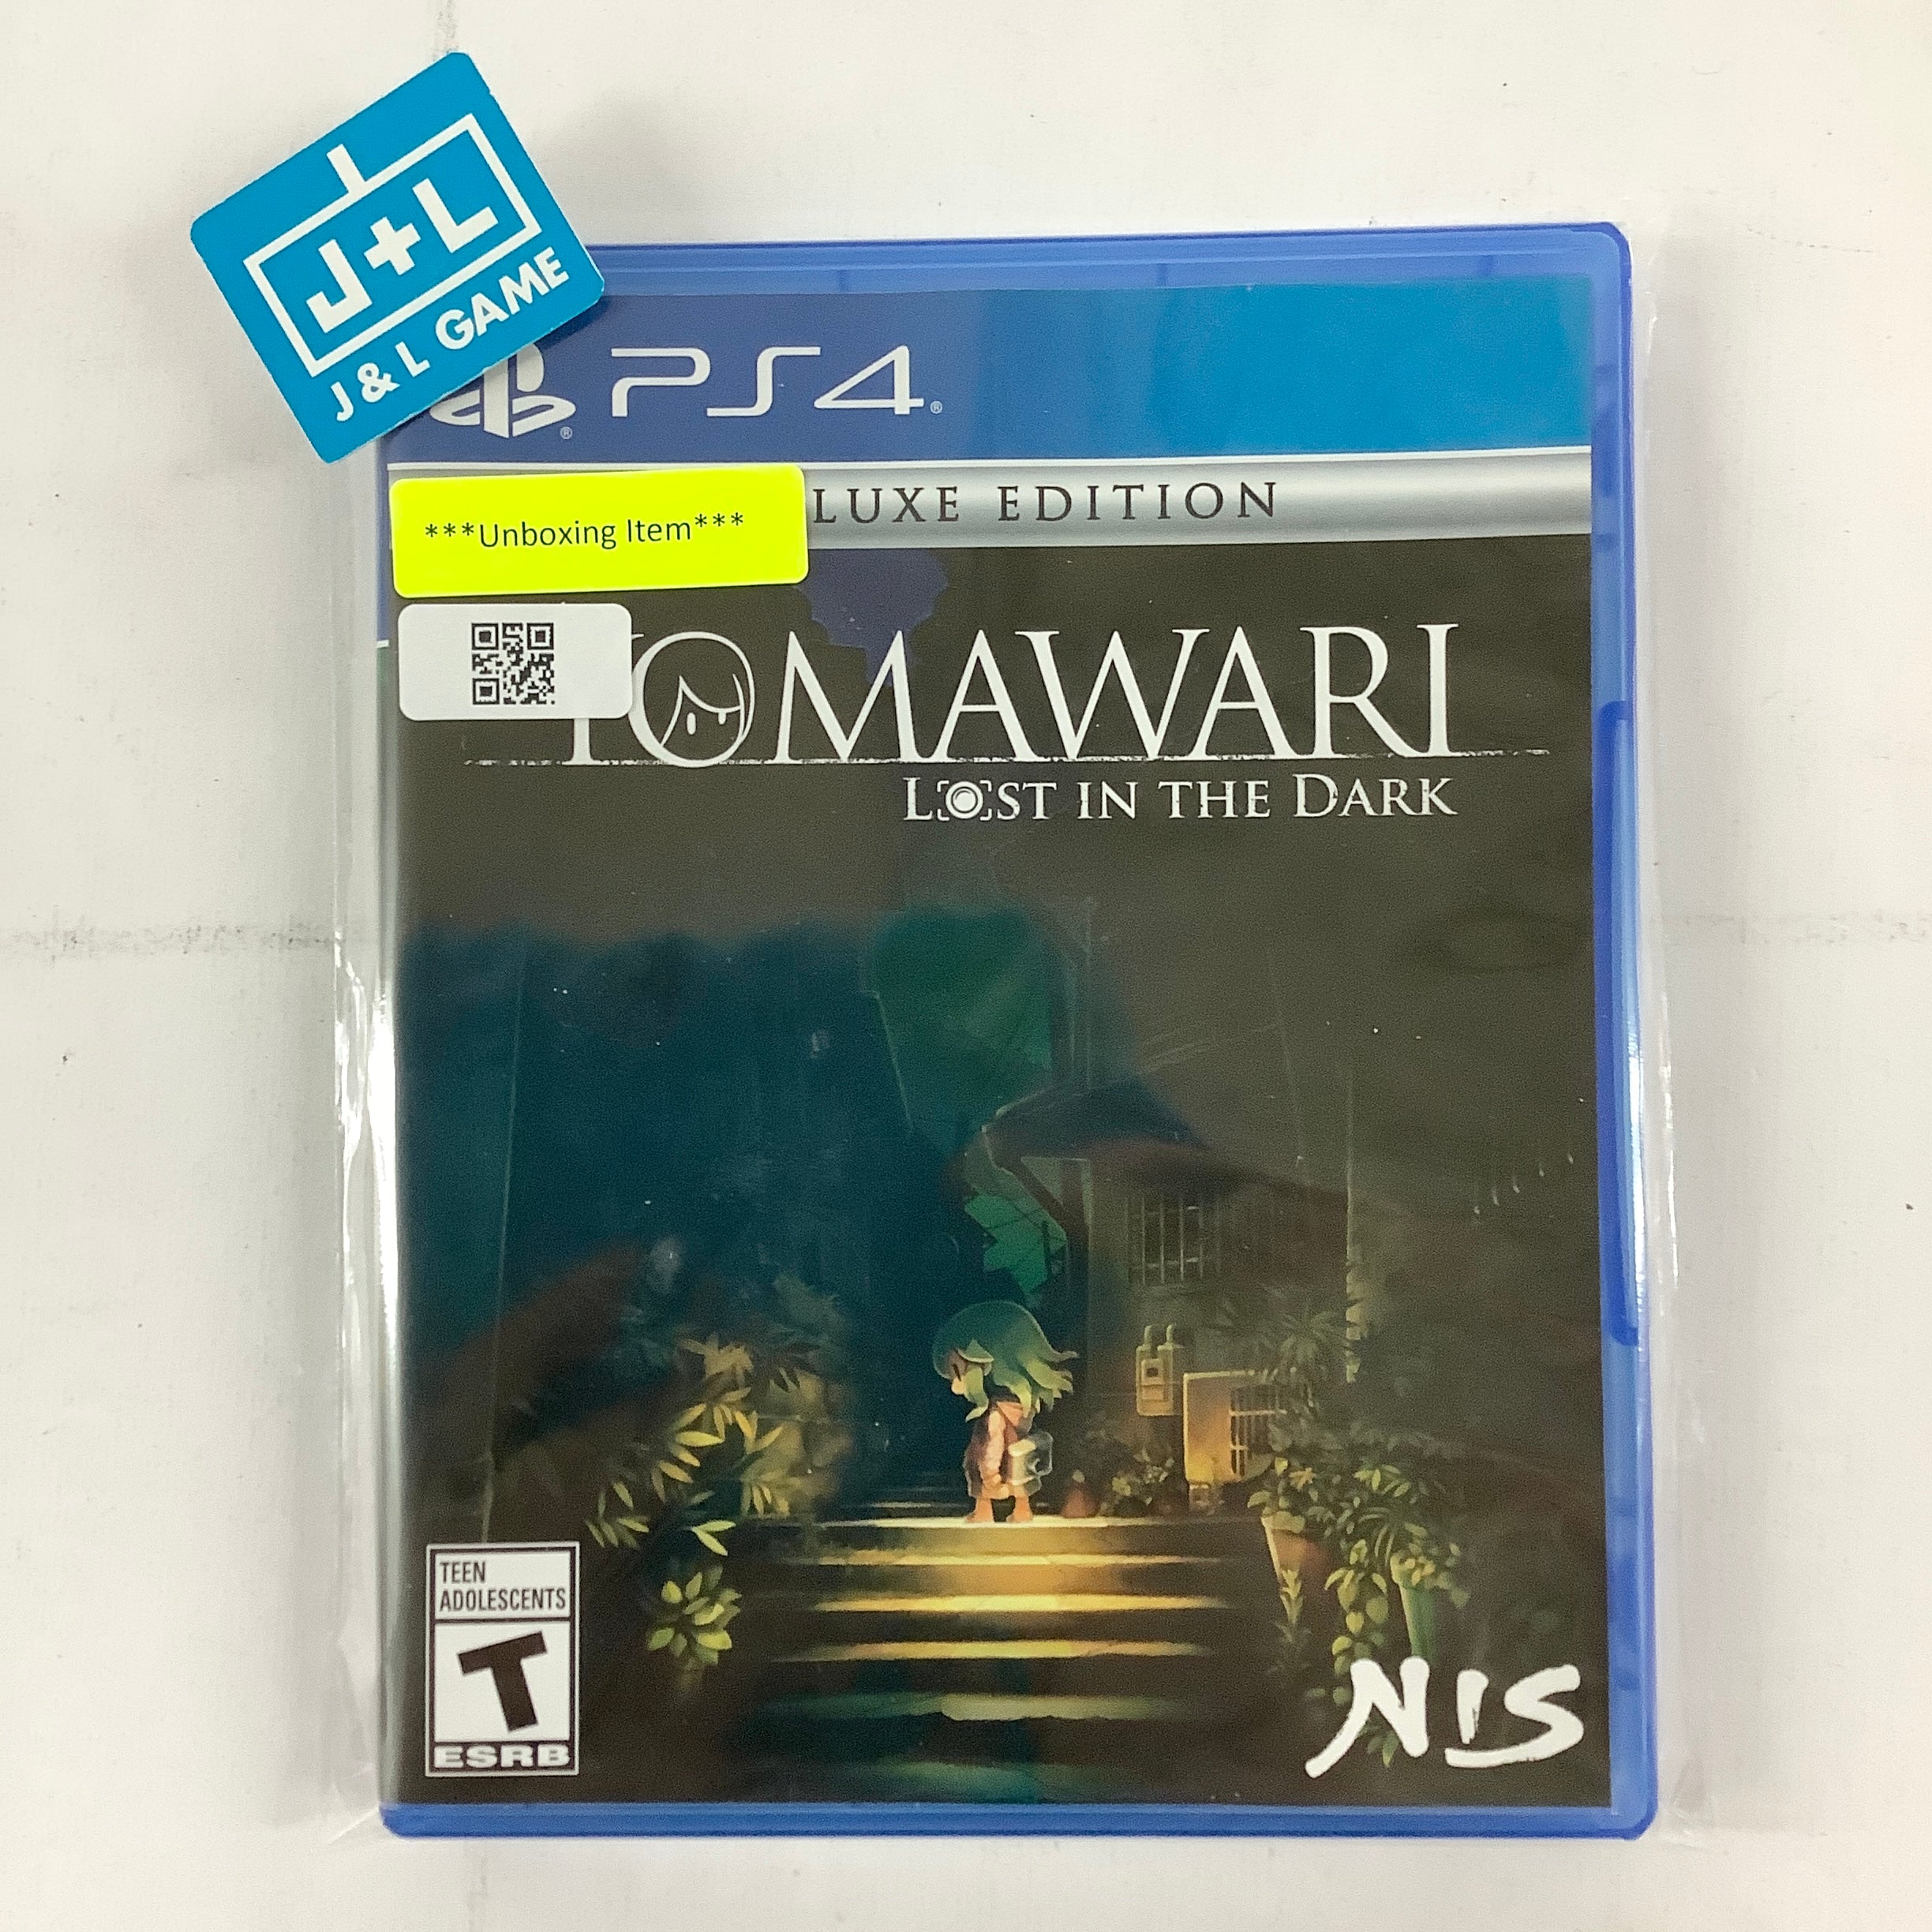 Yomawari: Lost in the Dark Deluxe Edition - (PS4) PlayStation 4 [UNBOXING] Video Games NIS America   